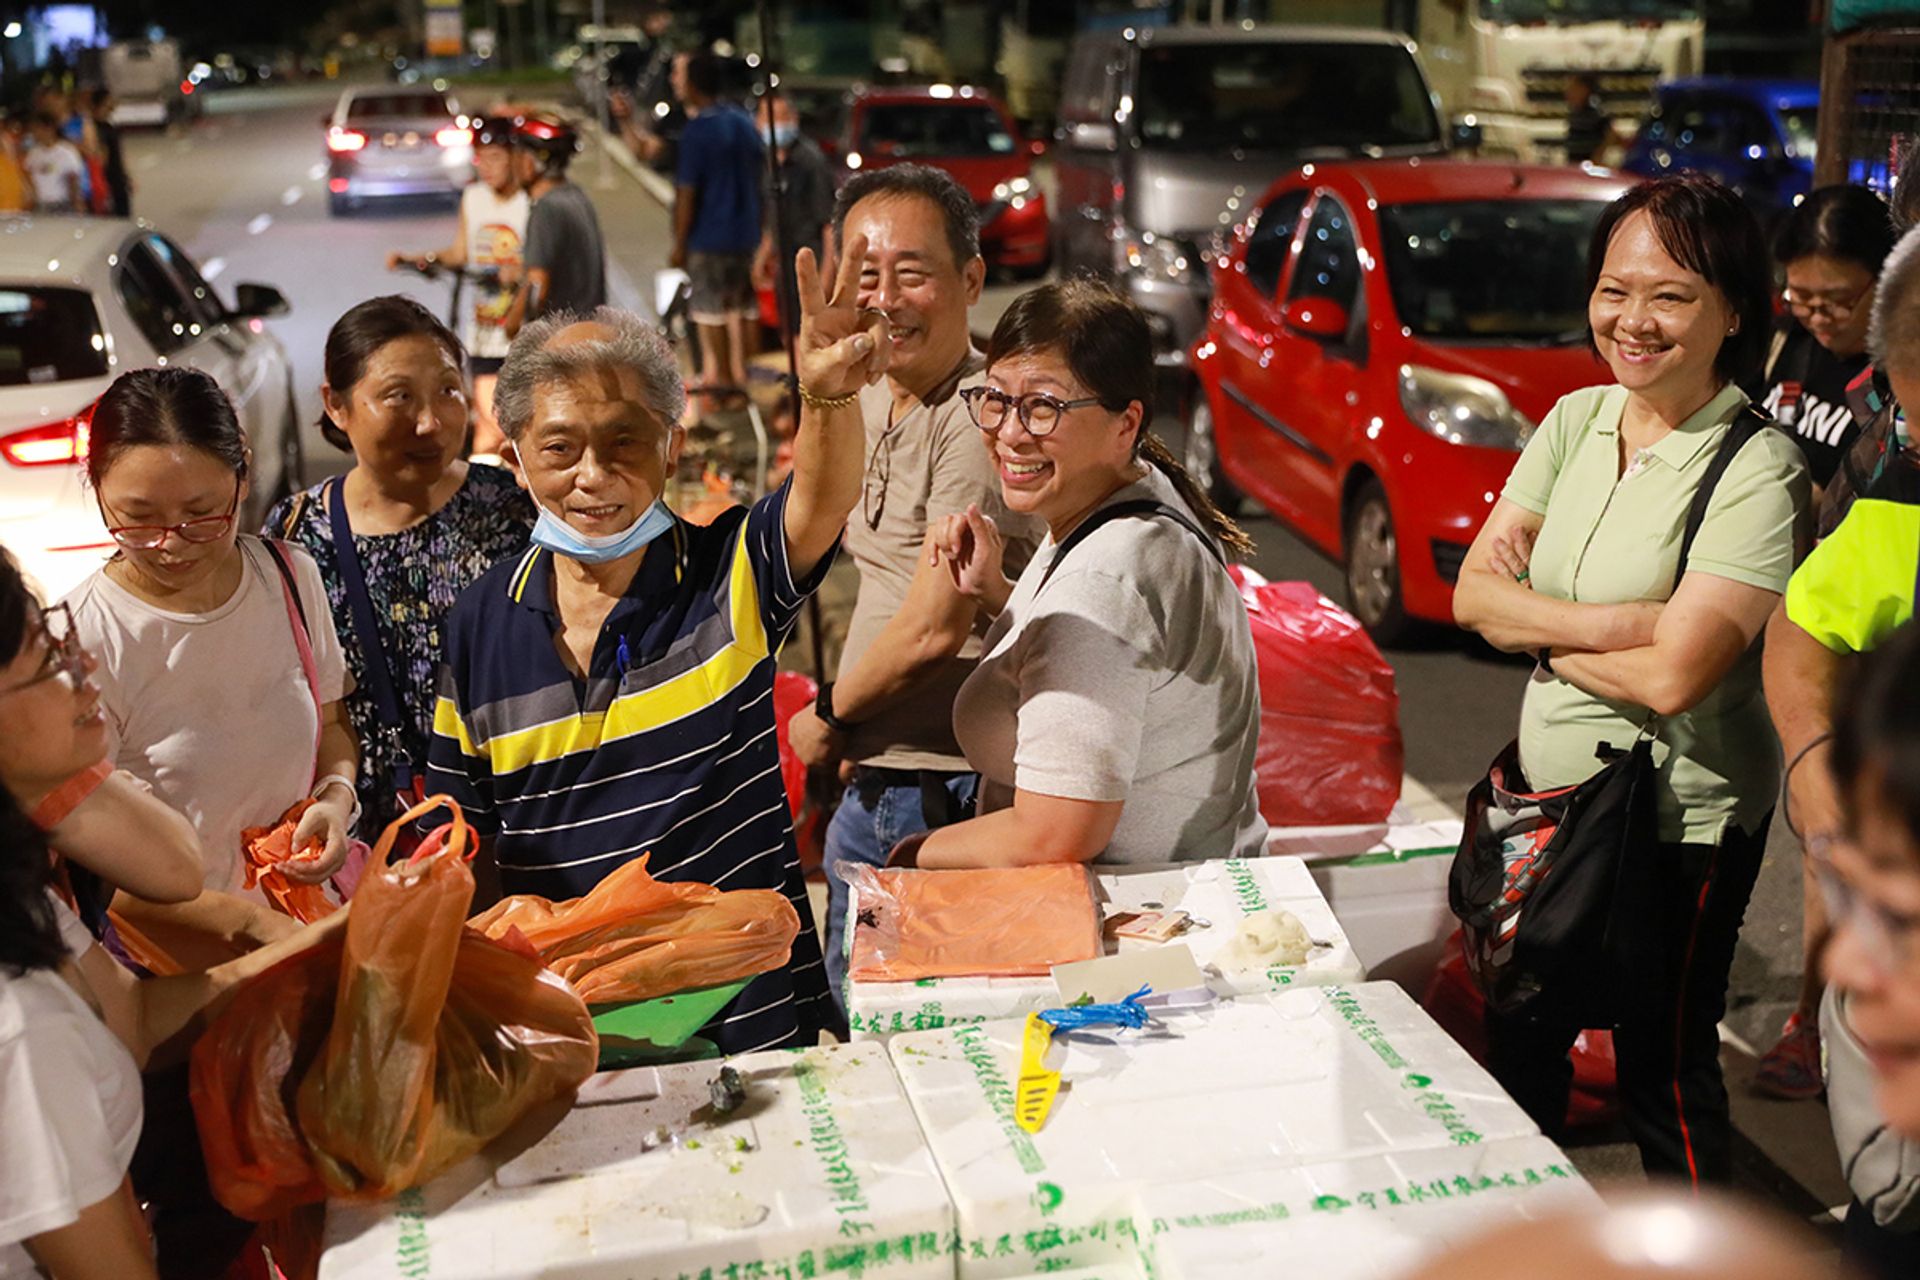 Mr Ong Eng Seng posing with his customers on July 1. A larger-than-usual crowd turned up on his last day of business. Curious first-time visitors came to see the market before it is closed for good on Aug 19, while long-time customers dropped by to bid farewell.